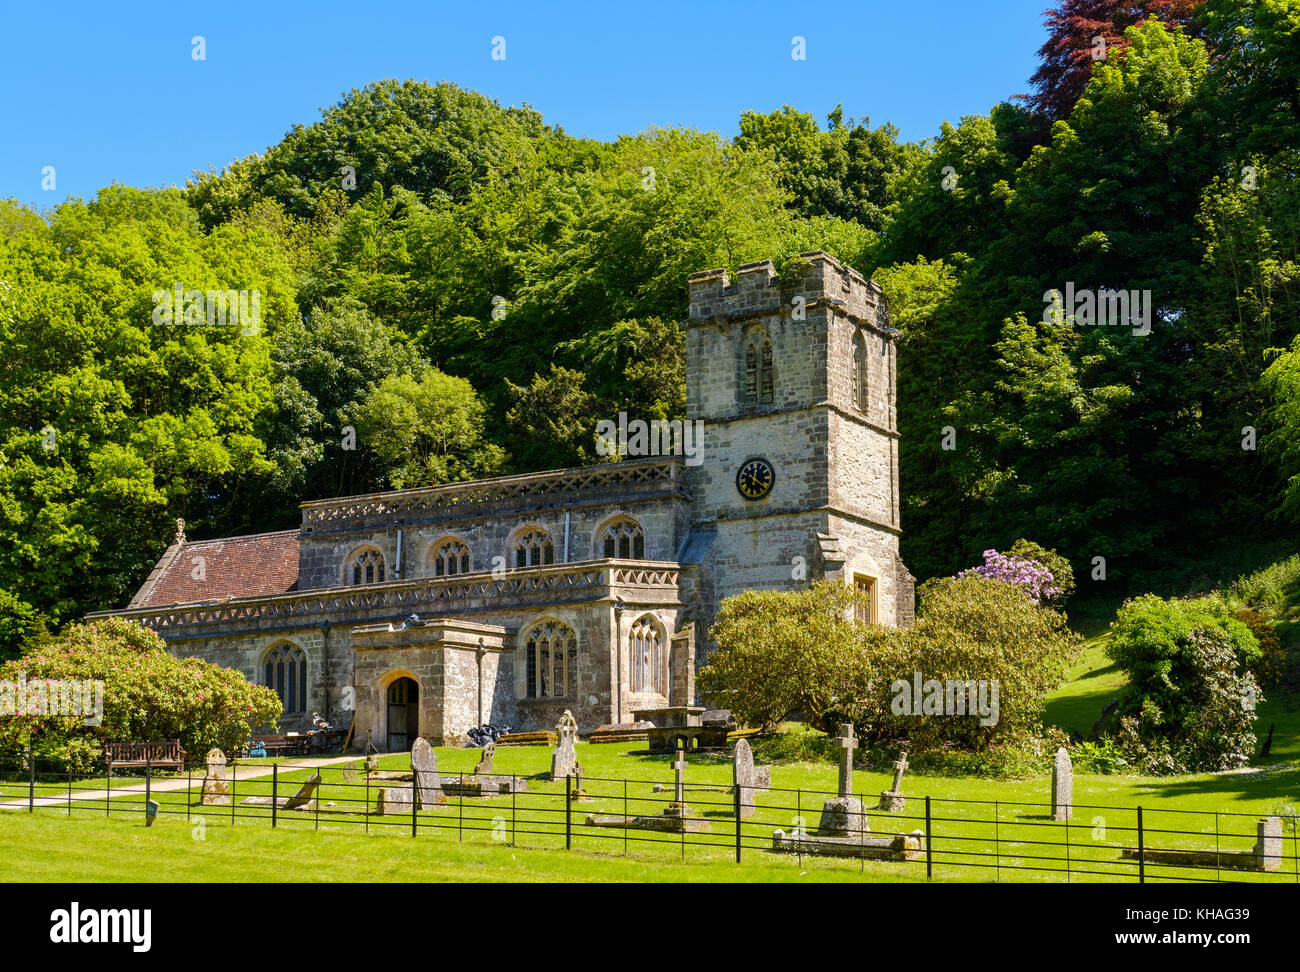 Church of St. Peter, Stourton, Wiltshire, England, Great Britain Stock Photo